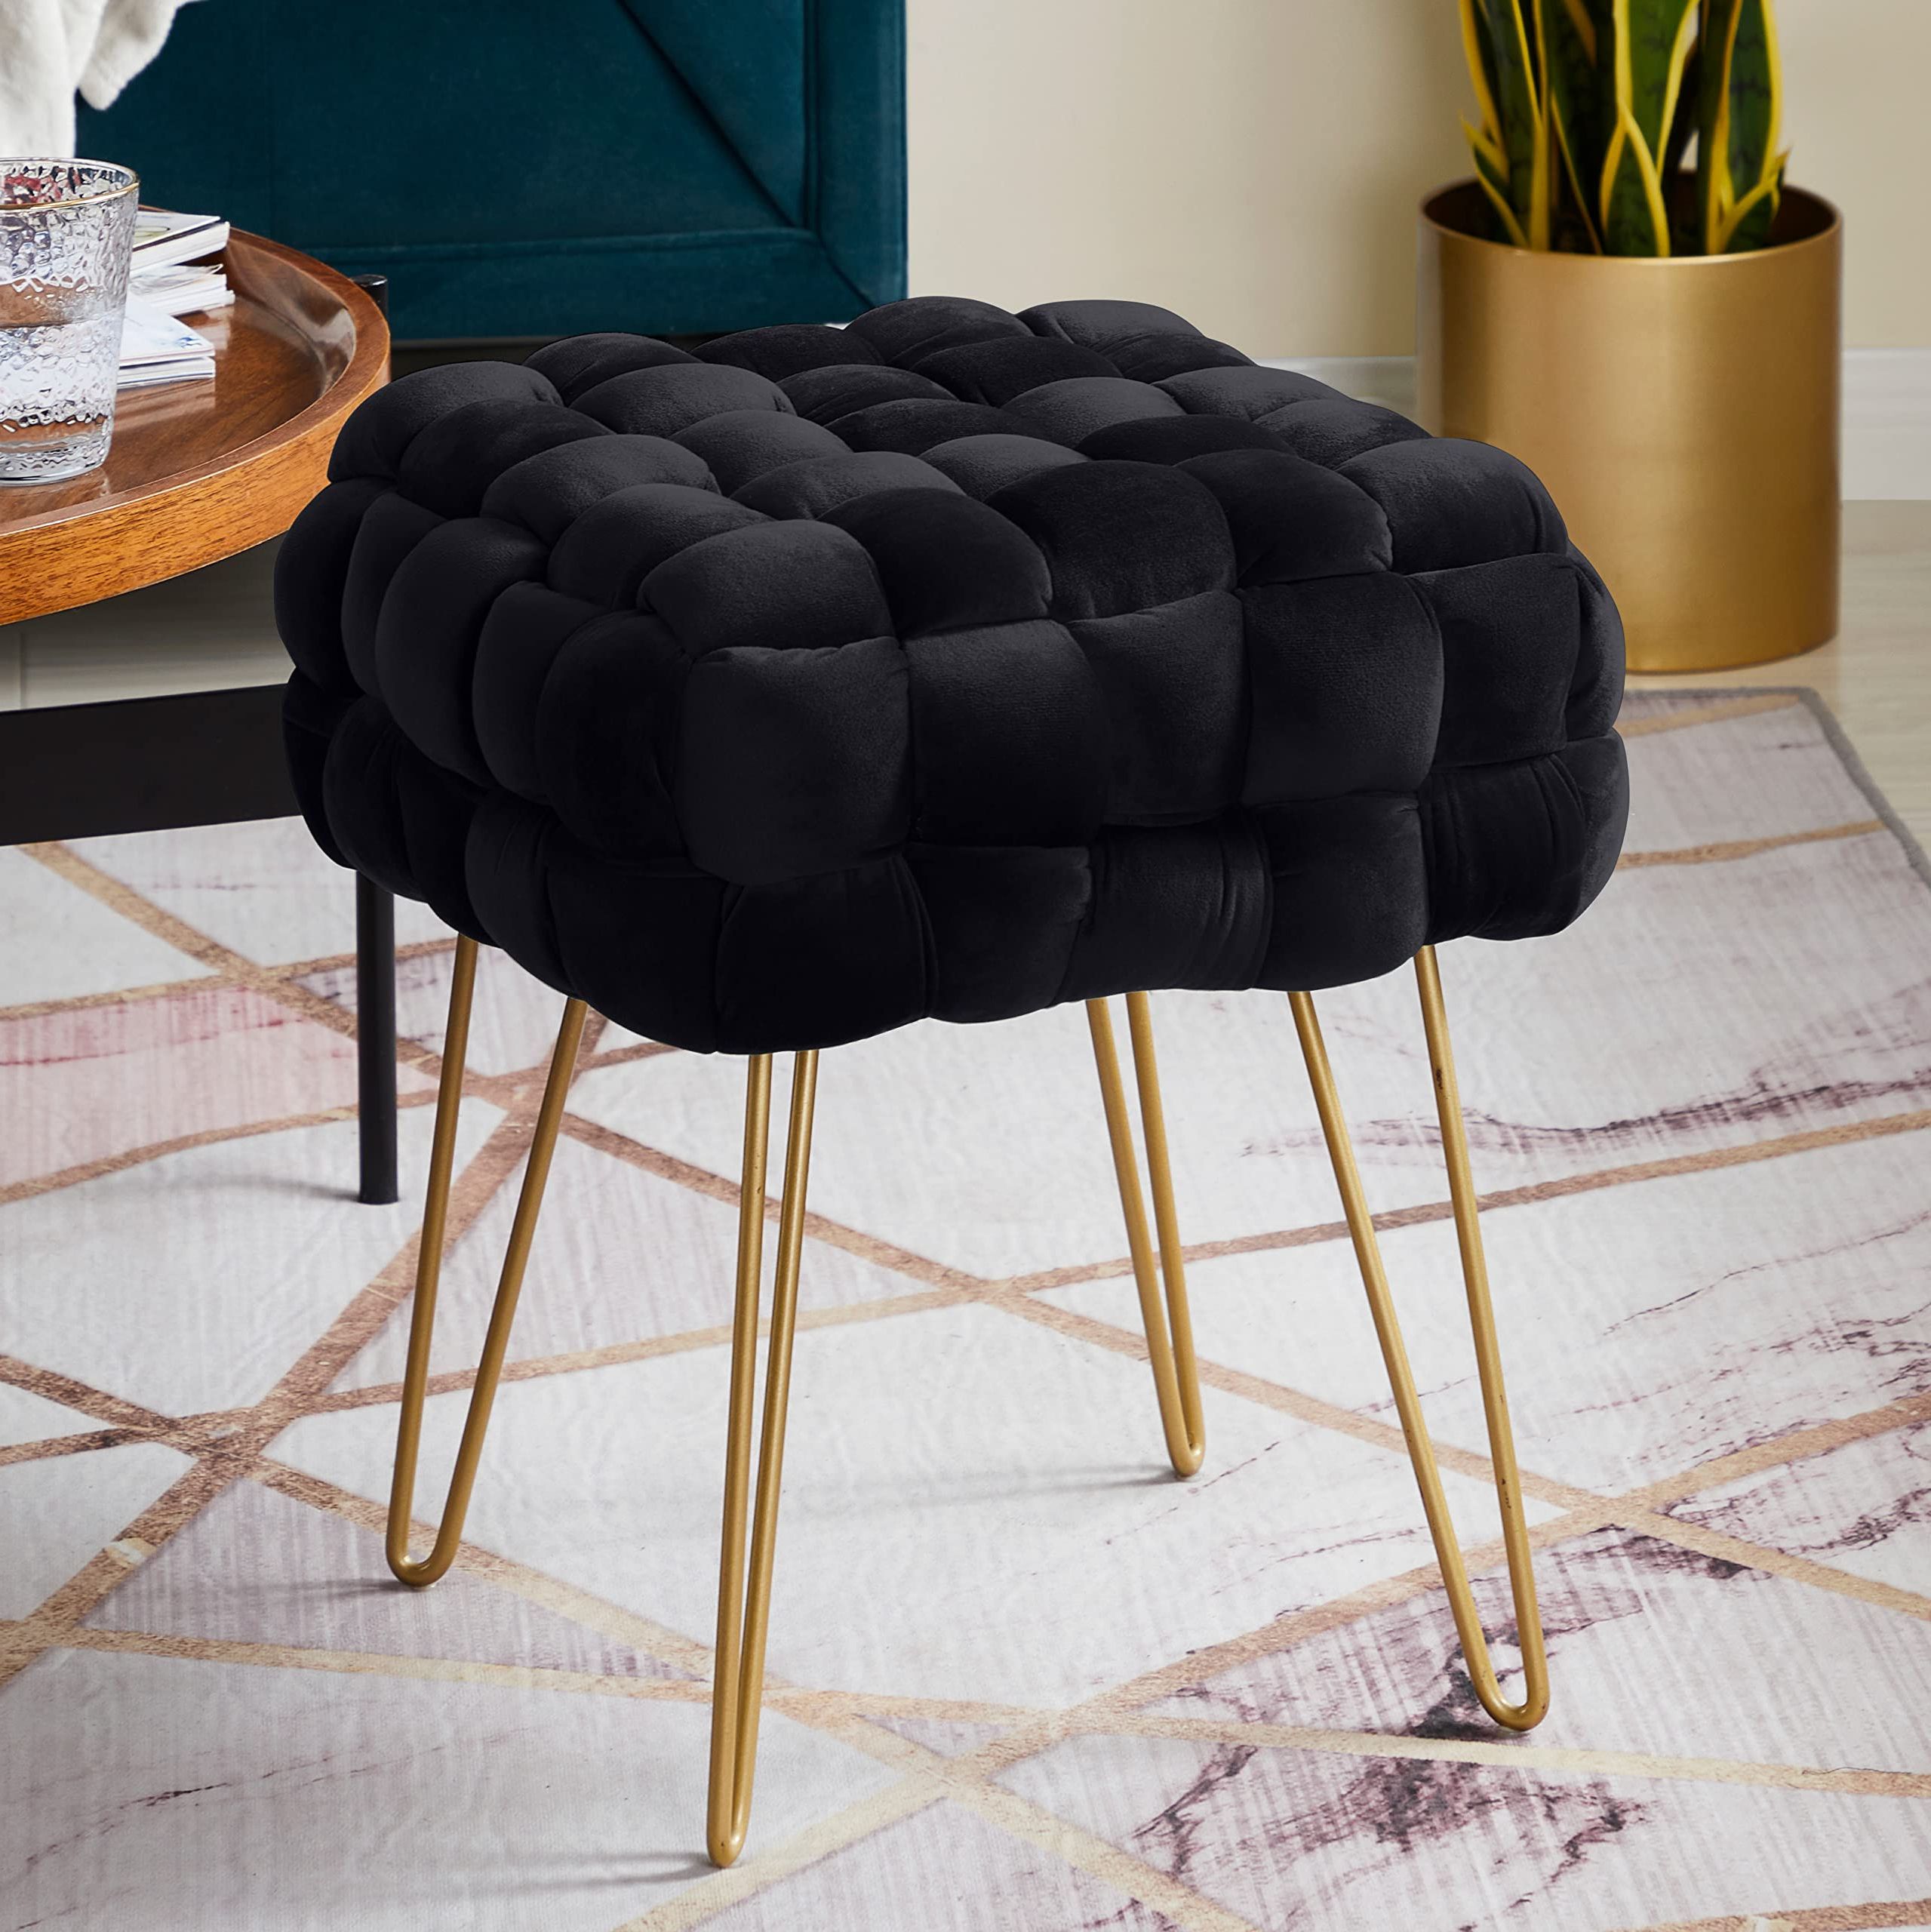 Most Up To Date Velvet Ottomans Within Amazon: Ornavo Home Modern Velvet Vanity Stool Square Ottoman Foot Rest  Stool/seat With Gold Metal Legs – Black : Home & Kitchen (View 2 of 10)